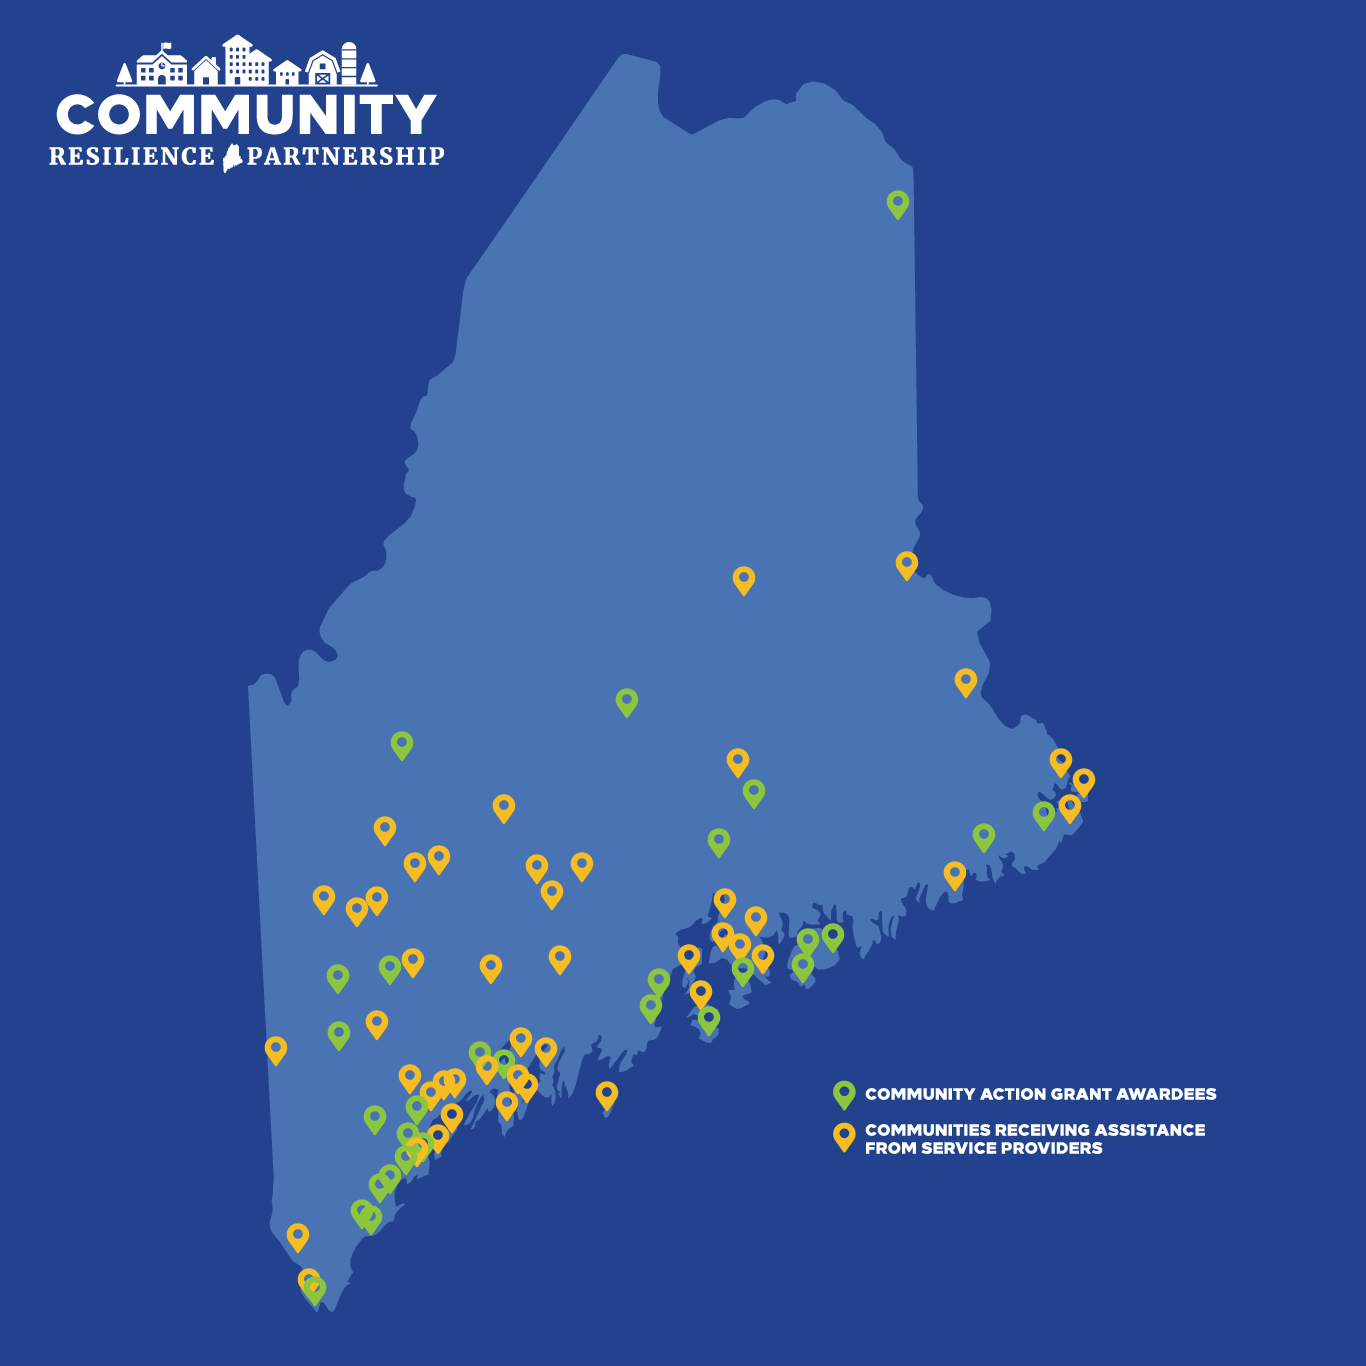 Dark blue background with light blue map of Maine, text "Community Resilience Partnership" in upper left, and orange and green pins showing community grant awardees and communities to be assisted by service providers